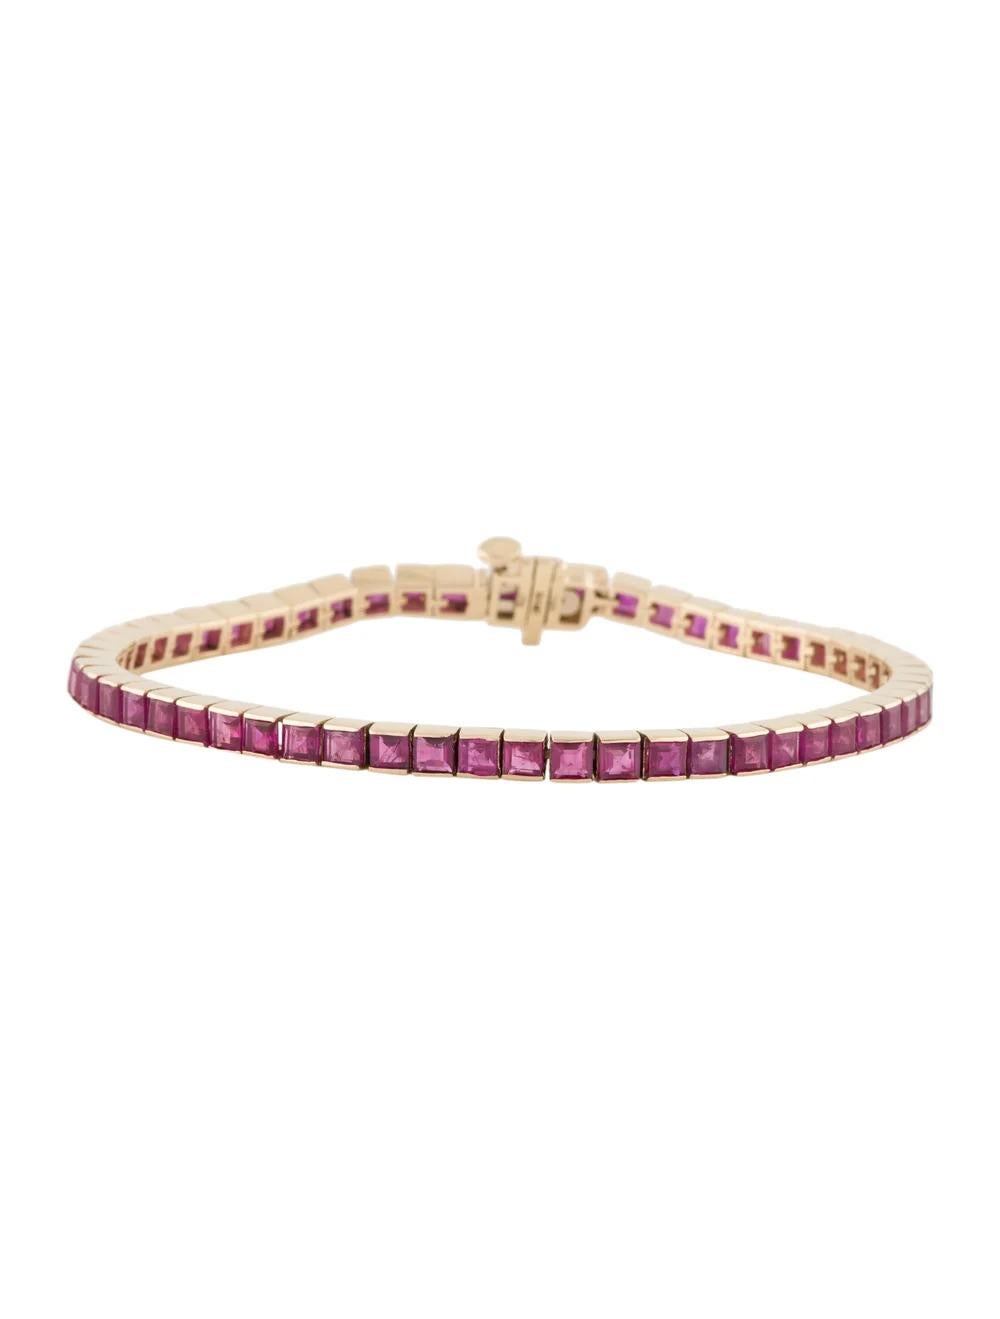 Experience the timeless elegance of this stunning 14K Yellow Gold Bracelet adorned with a captivating 10.13 Carat Square Step Cut Ruby. Crafted to perfection, this exquisite piece of fine jewelry is designed to elevate any ensemble with its